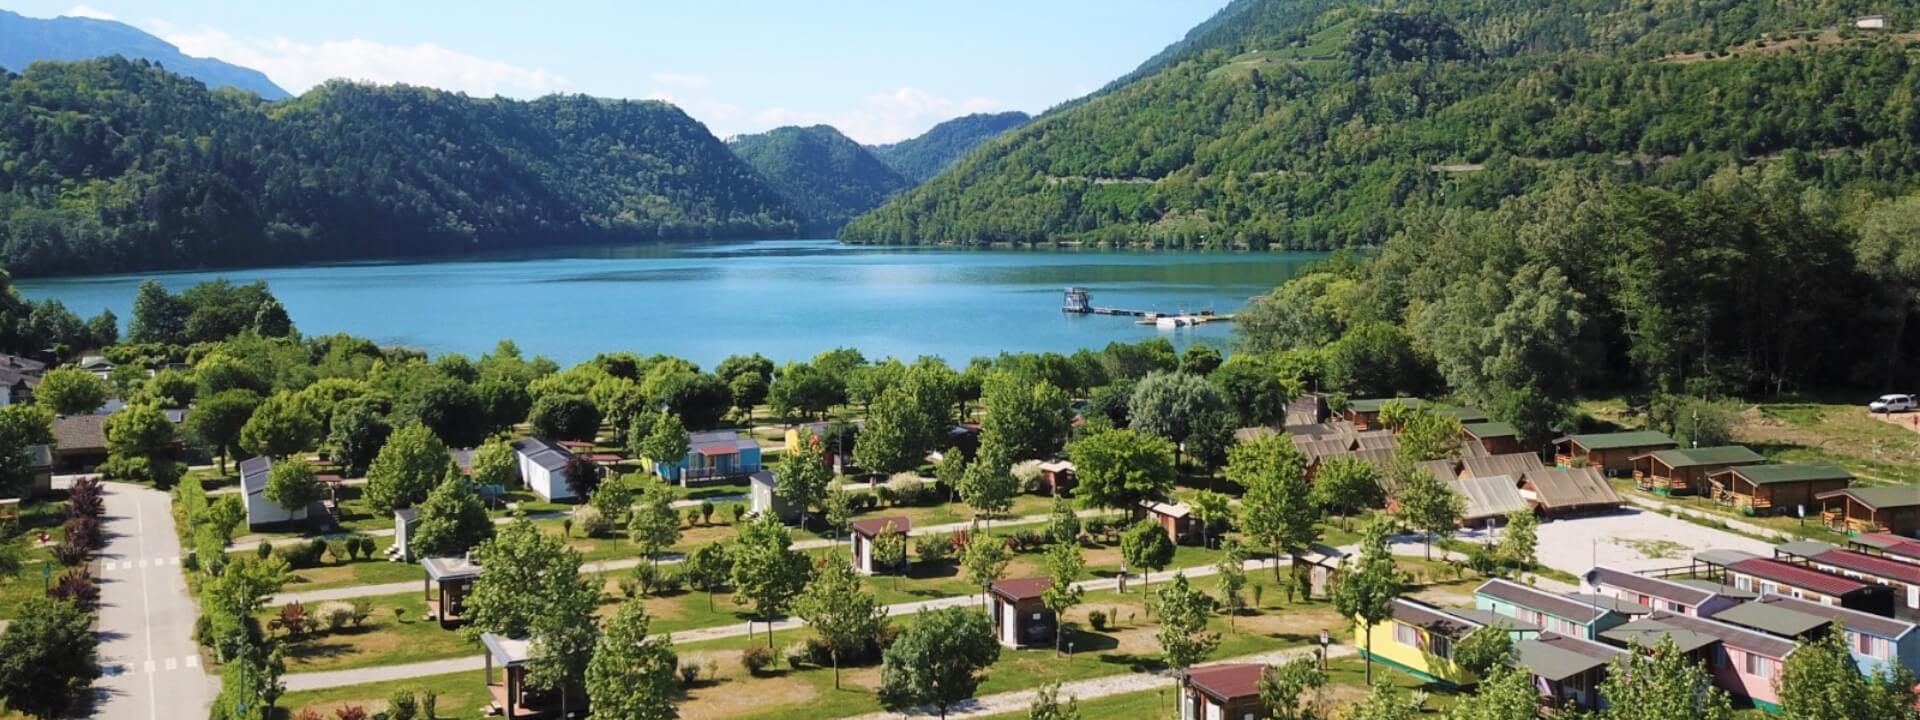 campinglevico en june-offer-campsite-lake-levico-with-glamping-tents 005